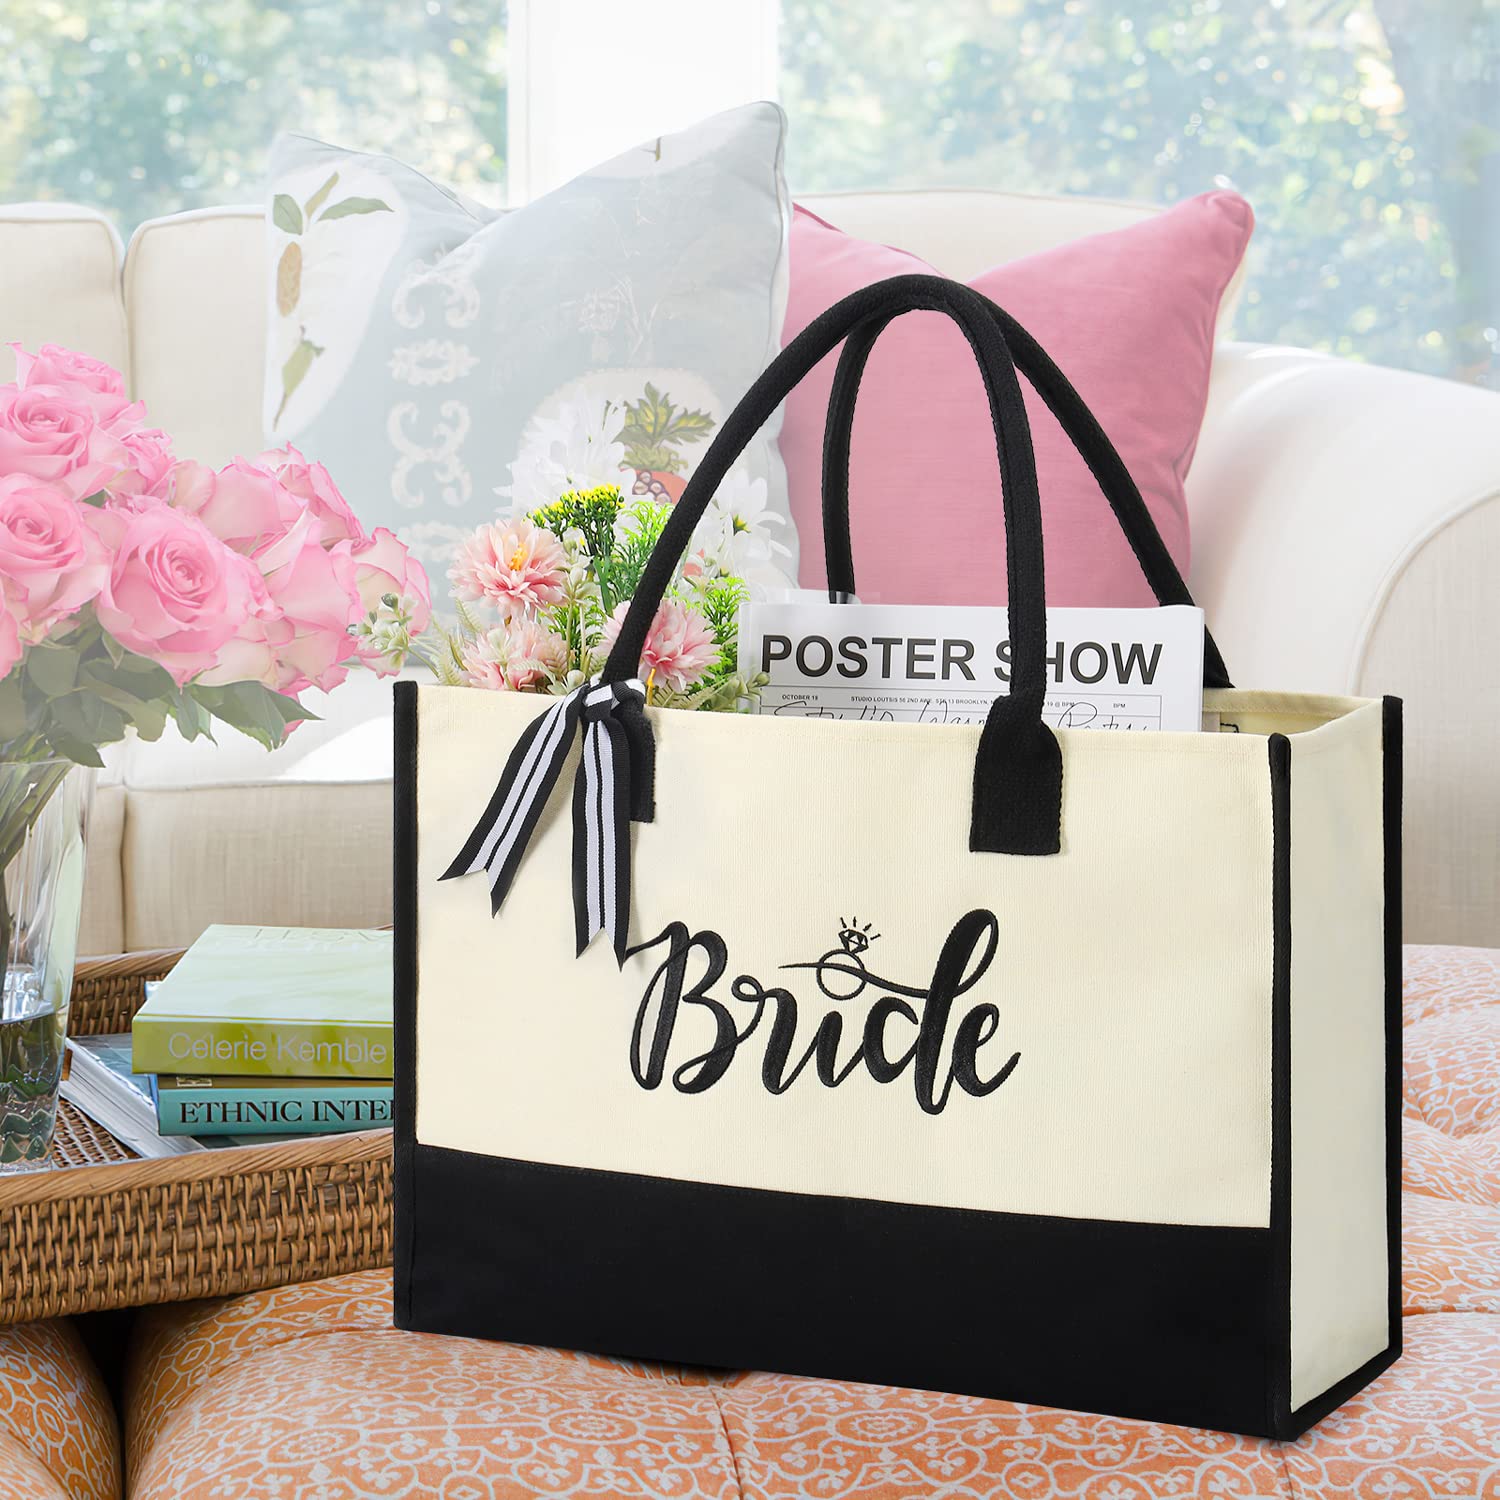 Bride Tote Bag Bridal Shower Gifts Embroidered Canvas Personalized Bridal Bag Engagment Wedding Honeymoon Gifts for Bride at Bachelorette Party Gift for Friend Trip Handbag with Internal Zipper Pocket